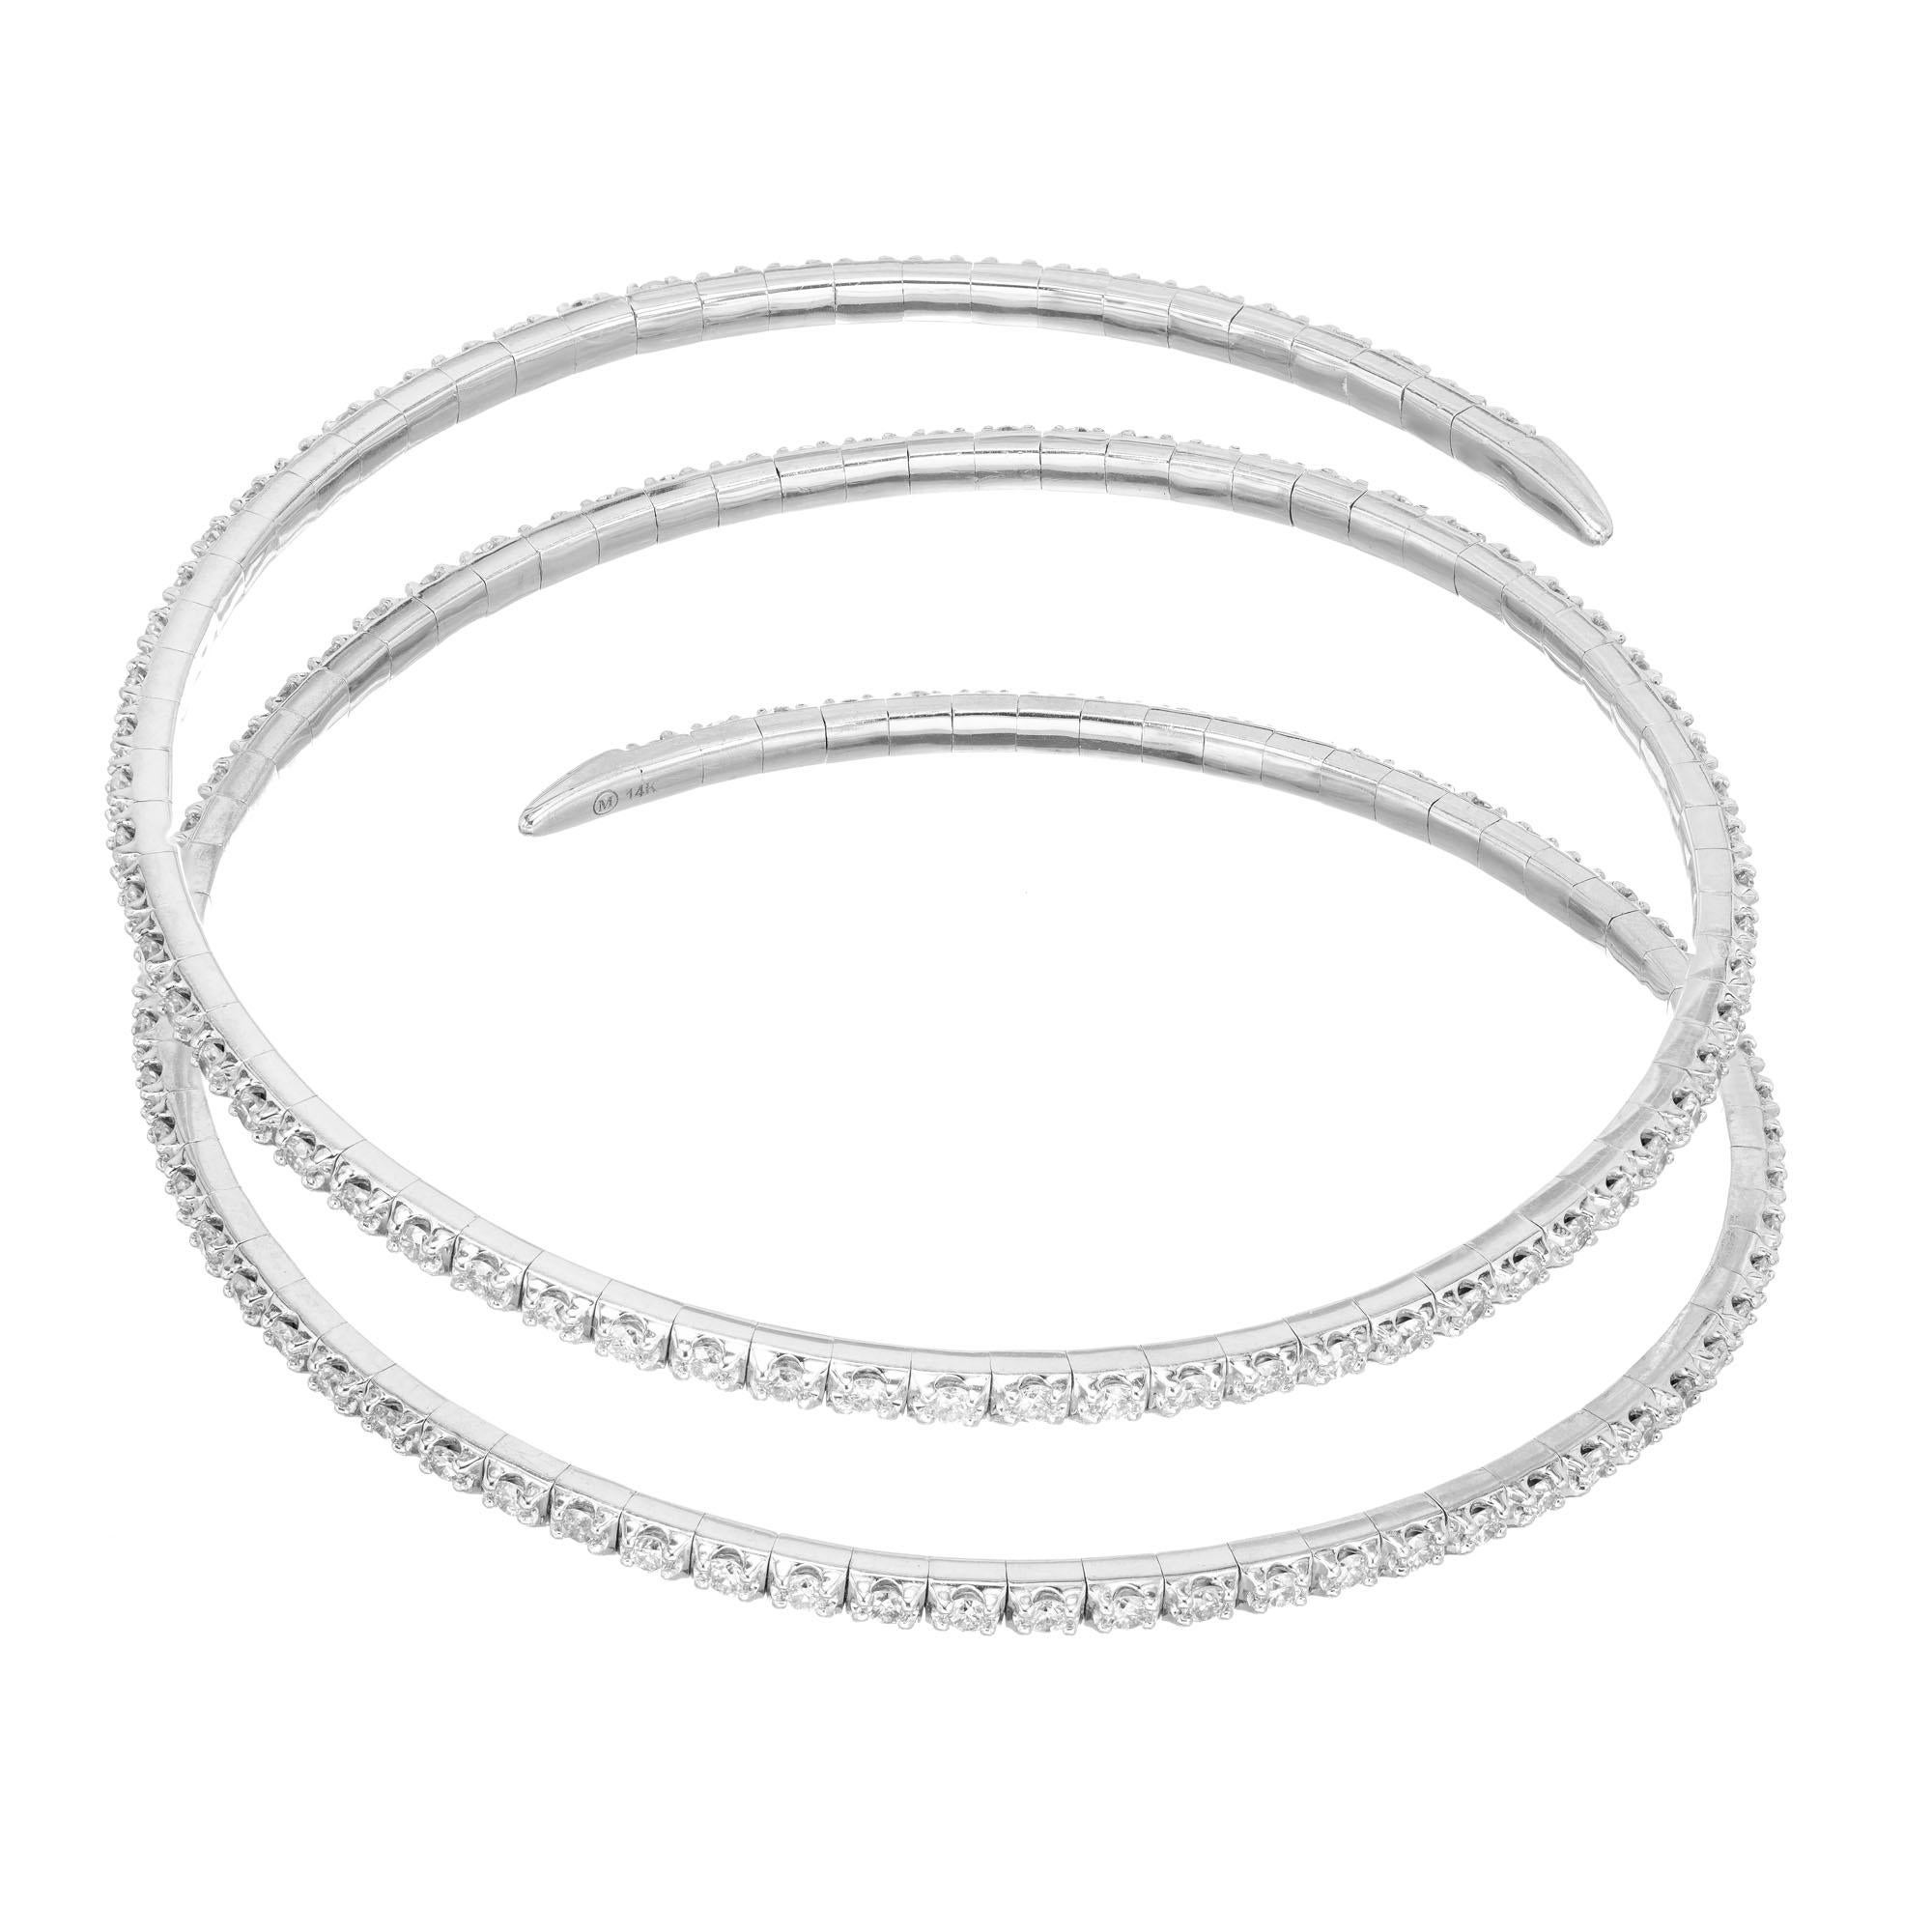 Coiled slip on 14k white gold 3.00 carat full cut diamond bracelet

150 round brilliant cut diamonds H-I SI, approx. 3.00cts
14k white gold 
Stamped: 14k
Hallmark: M
19.8 grams
Width: 2.3mm
Thickness/depth: 2.5mm
Inside Dimensions: 2.5 Inches x 2.5